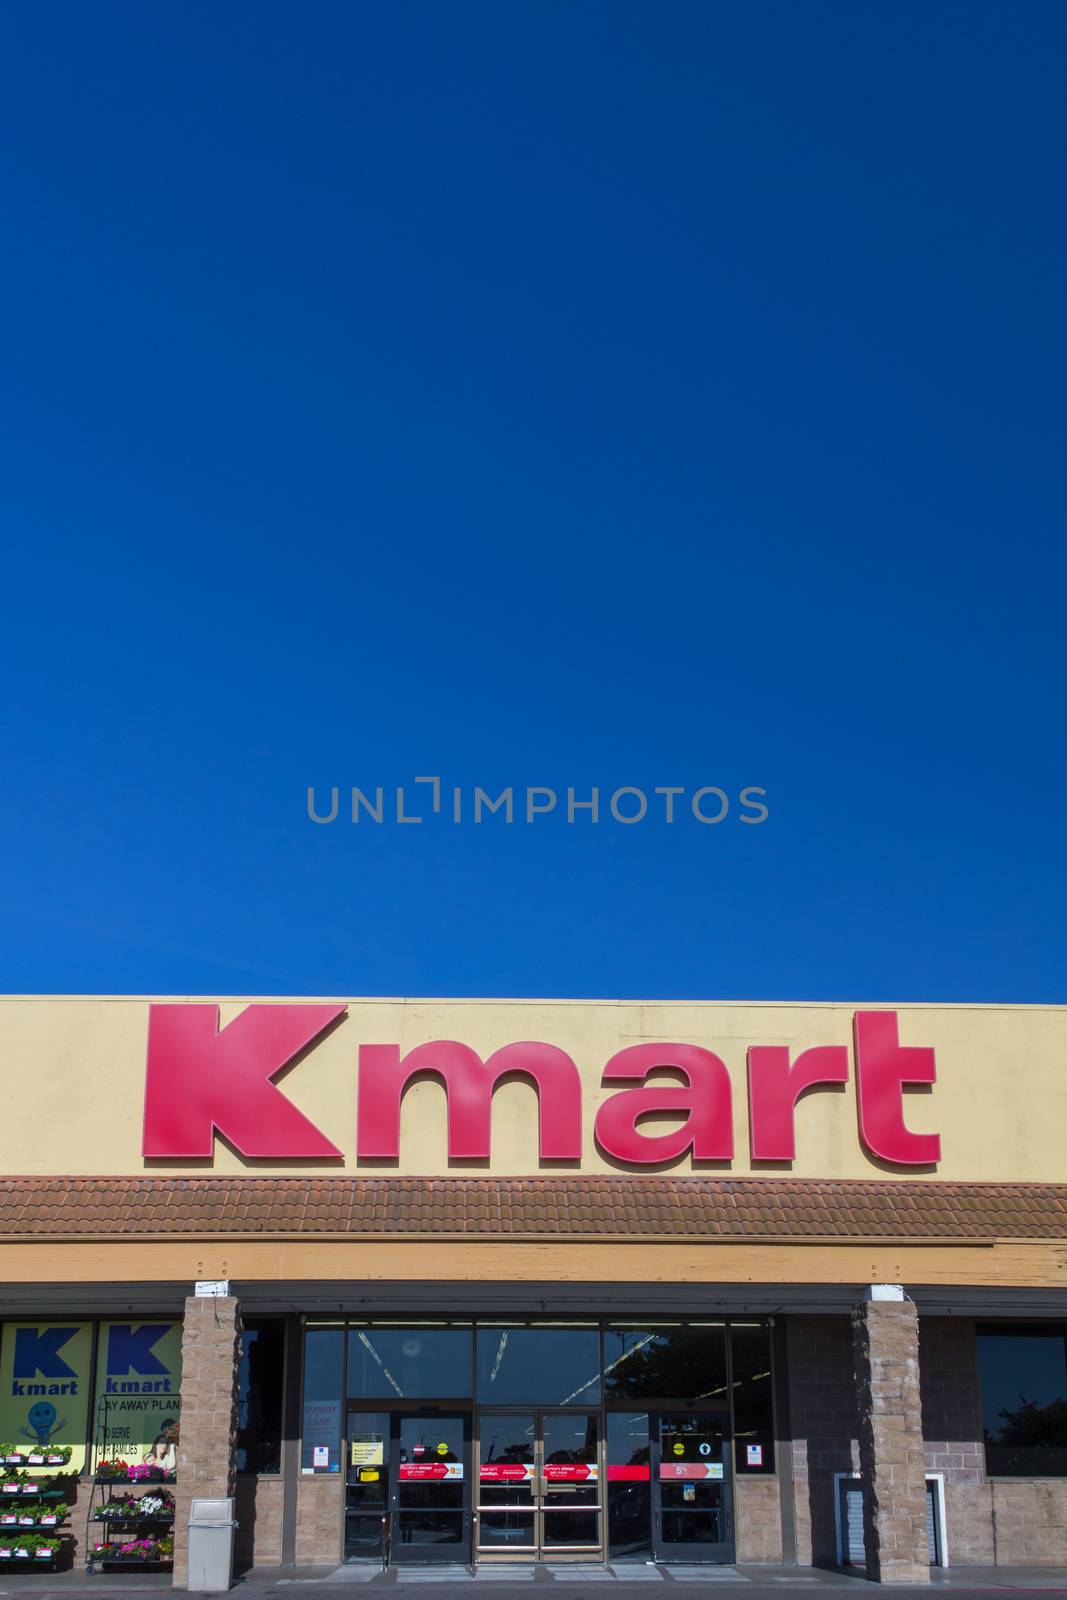 SALINAS, CA/USA - APRIL 23, 2014: Kmart retail store exterior. Kmart is an American chain of discount department stores headquartered in the United States.